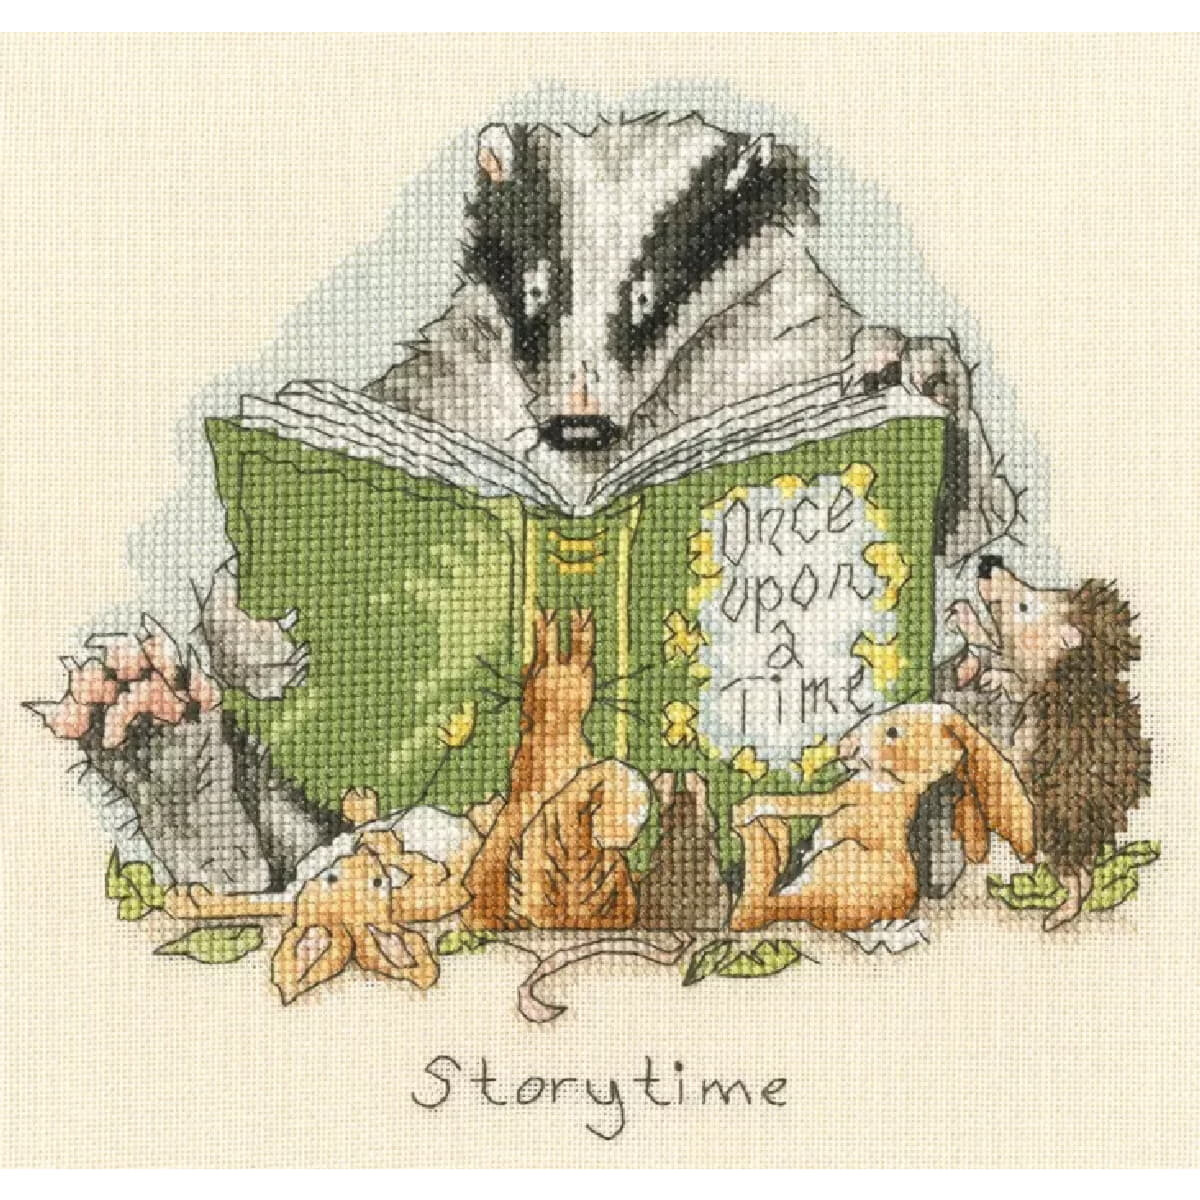 An embroidery pack from Bothy Threads features a badger...